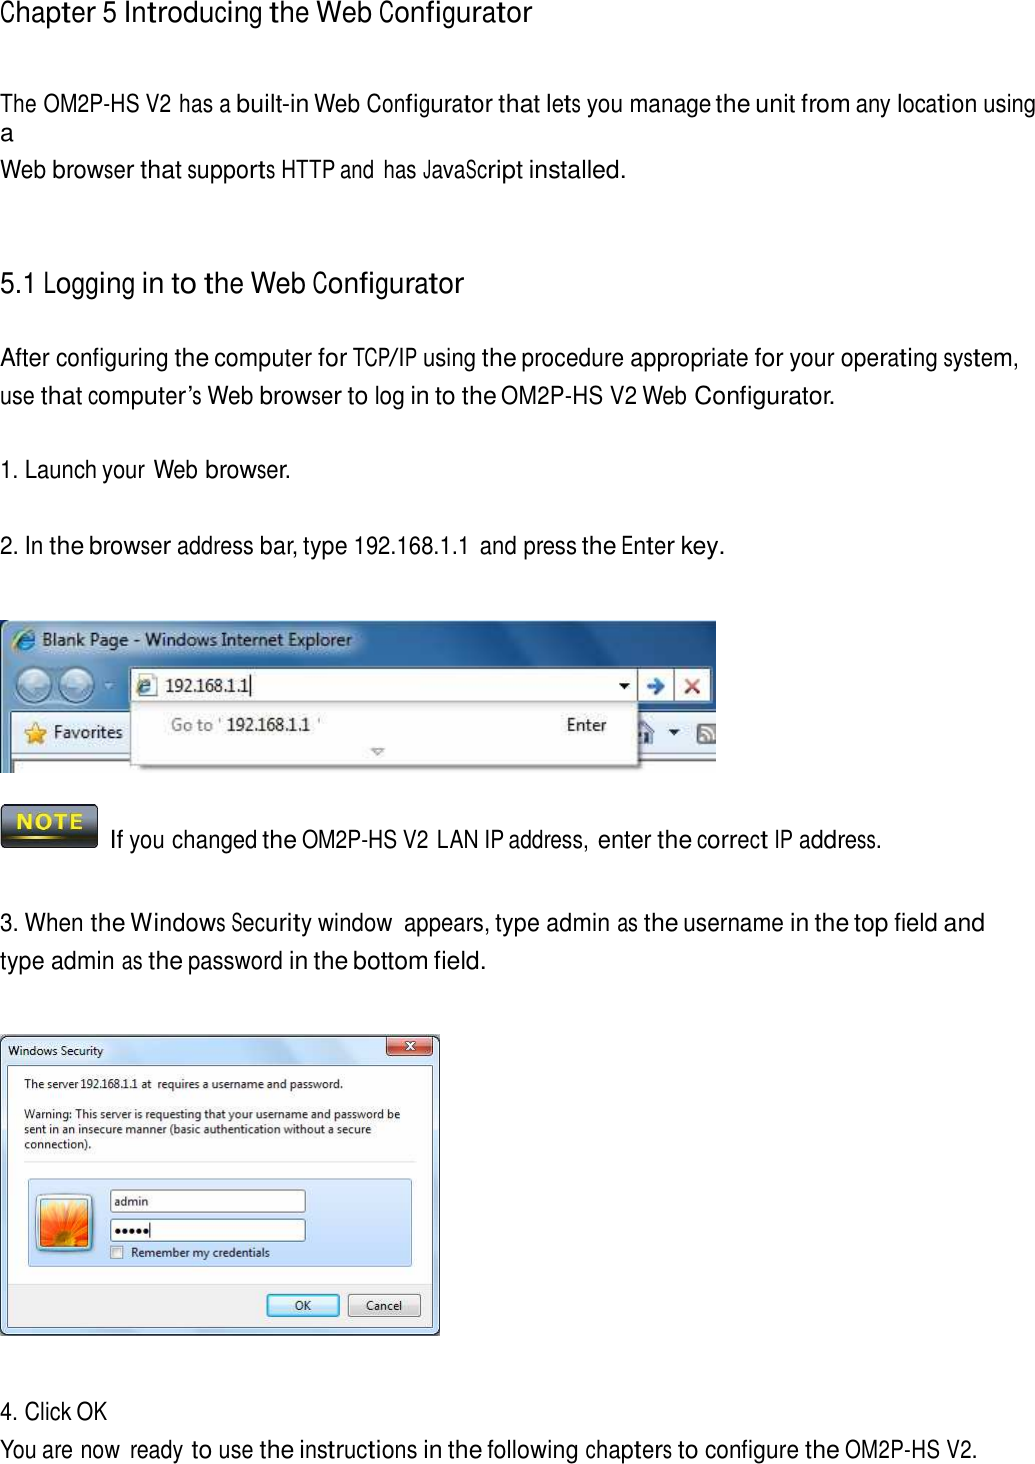 Chapter 5 Introducing the Web Configurator     The OM2P-HS V2 has a built-in Web Configurator that lets you manage the unit from any location using a Web browser that supports HTTP and  has JavaScript installed.     5.1 Logging in to the Web Configurator   After configuring the computer for TCP/IP using the procedure appropriate for your operating system, use that computer’s Web browser to log in to the OM2P-HS V2 Web Configurator.   1. Launch your Web browser.   2. In the browser address bar, type 192.168.1.1  and press the Enter key.       If you changed the OM2P-HS V2 LAN IP address, enter the correct IP address.    3. When the Windows Security window  appears, type admin as the username in the top field and type admin as the password in the bottom field.        4. Click OK You are now  ready to use the instructions in the following chapters to configure the OM2P-HS V2. 